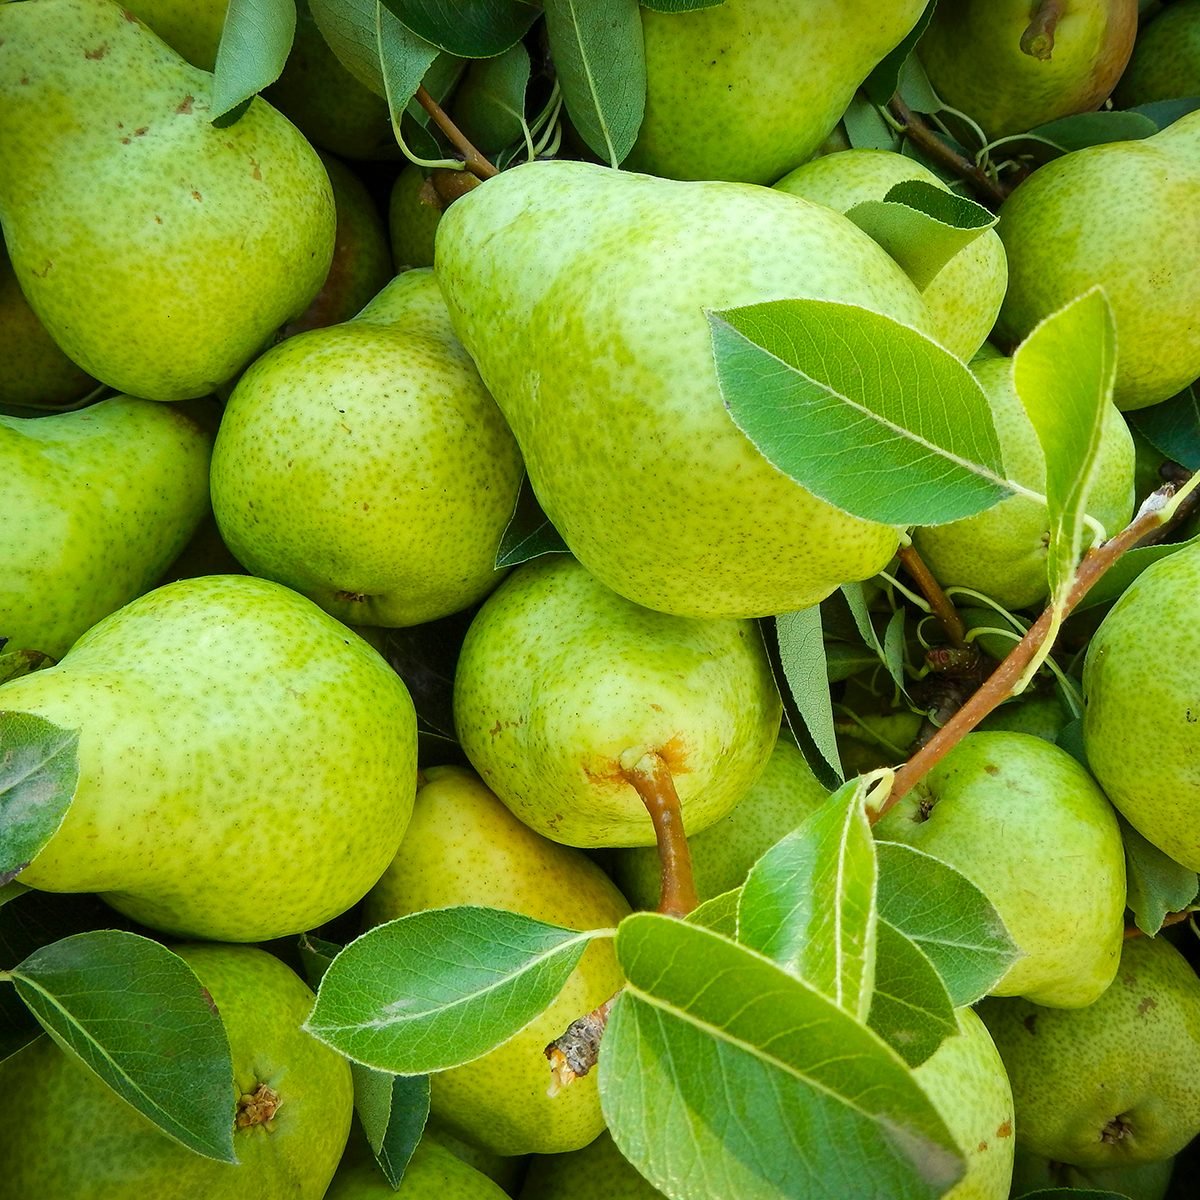 https://www.tasteofhome.com/wp-content/uploads/2020/10/green-pears-with-leaves-1084768780.jpg